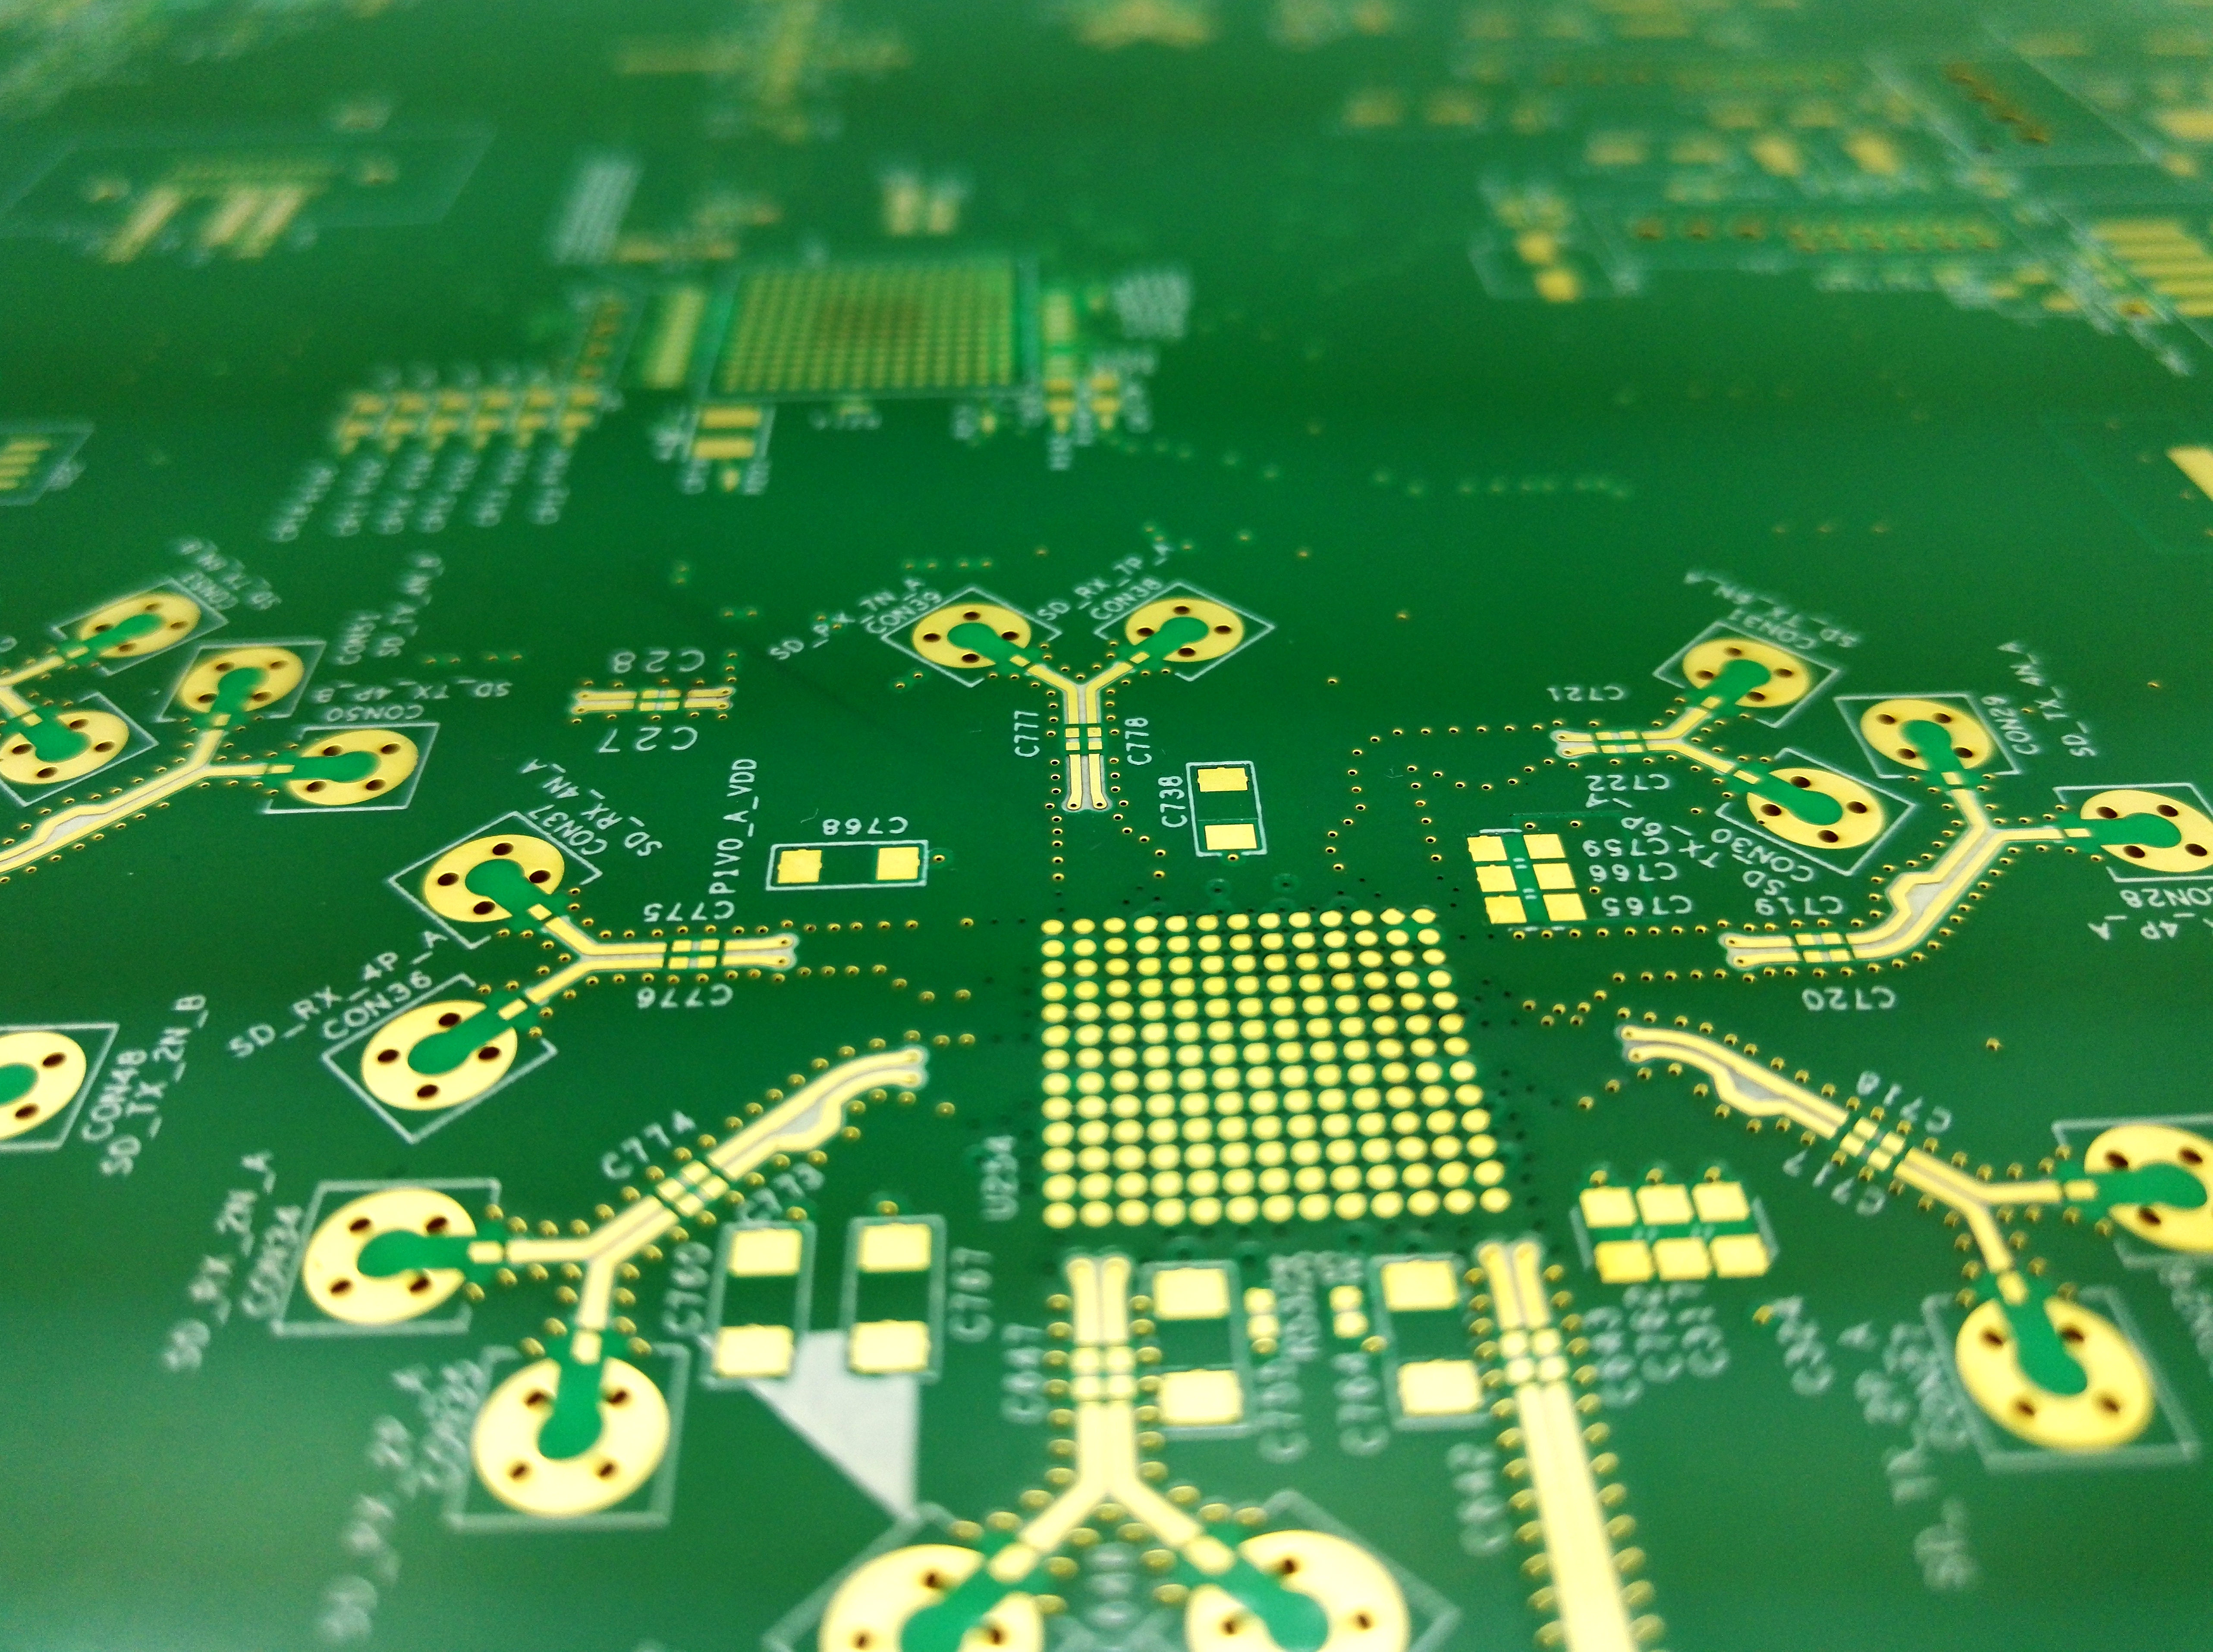 What is the reason why the solder on the surface of the circuit board is not tinned?